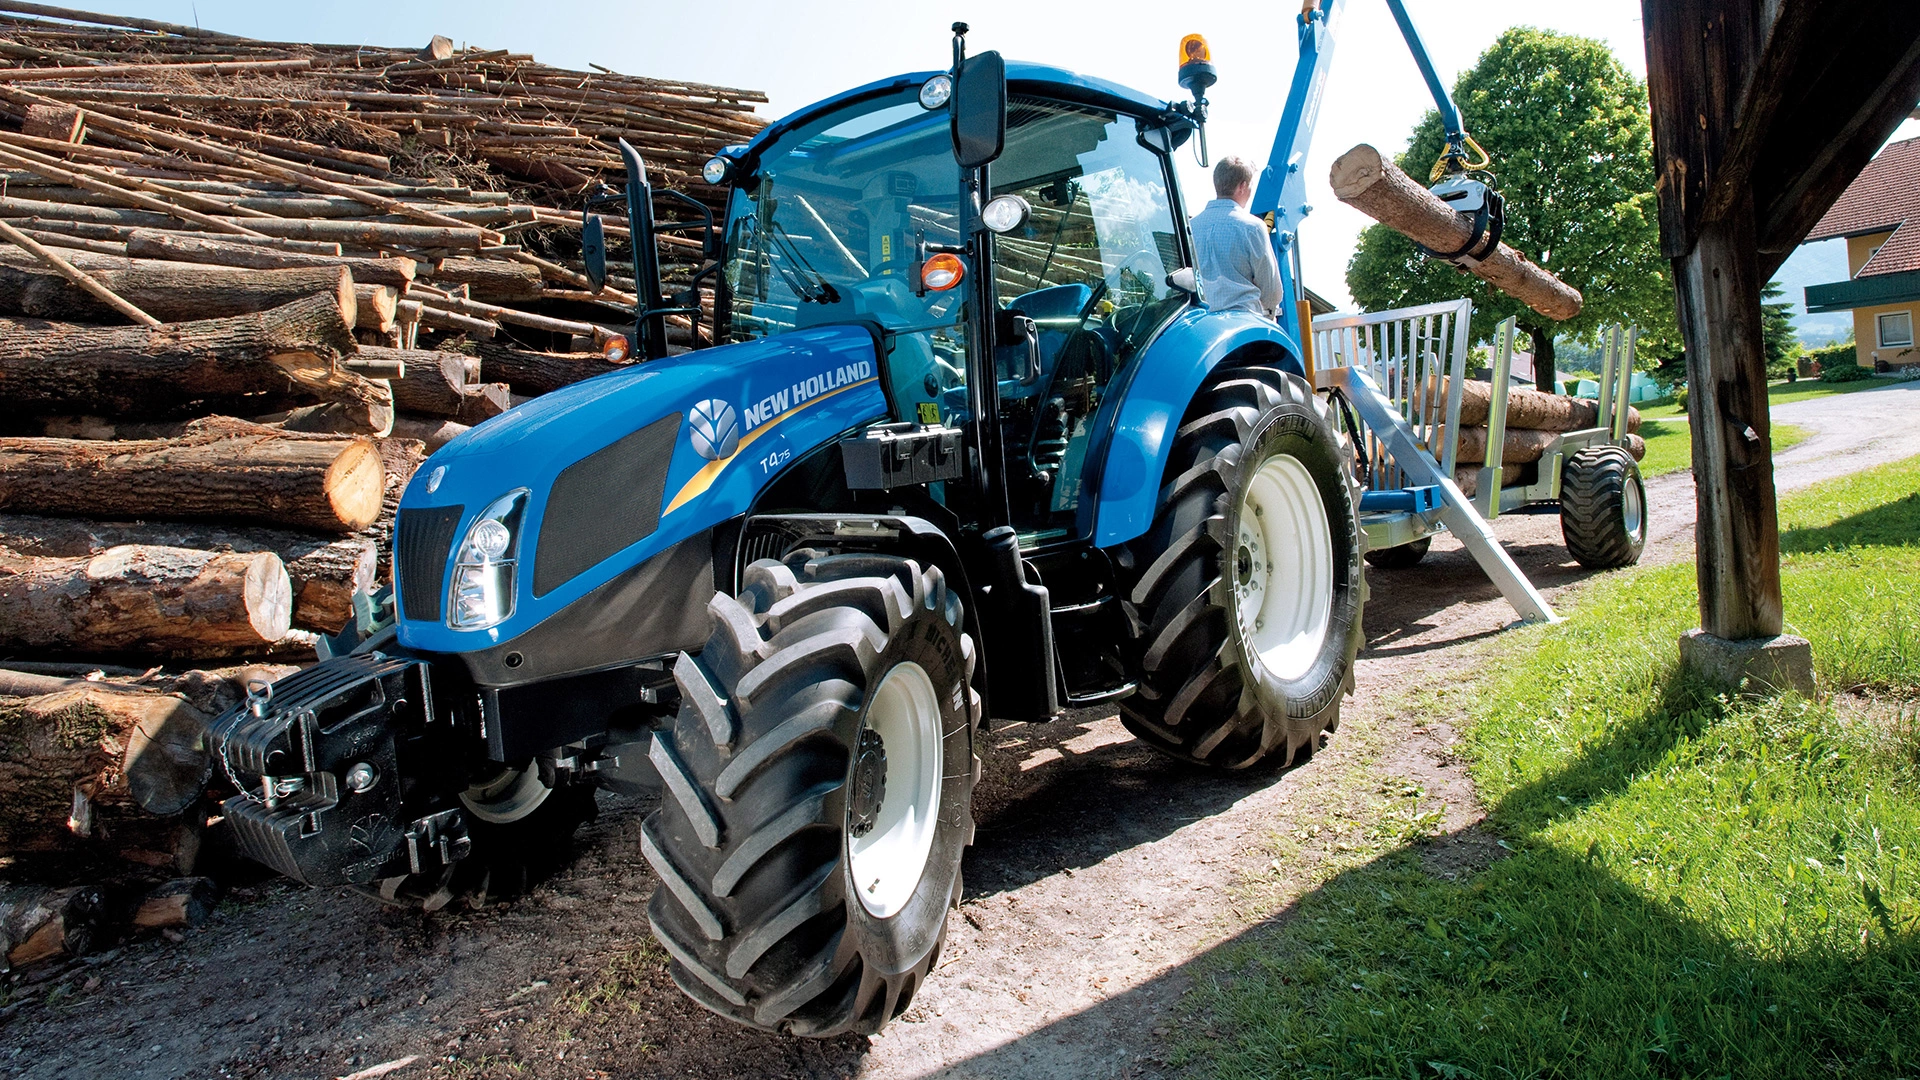 New Holland T4 tractor performing agricultural tasks on the field